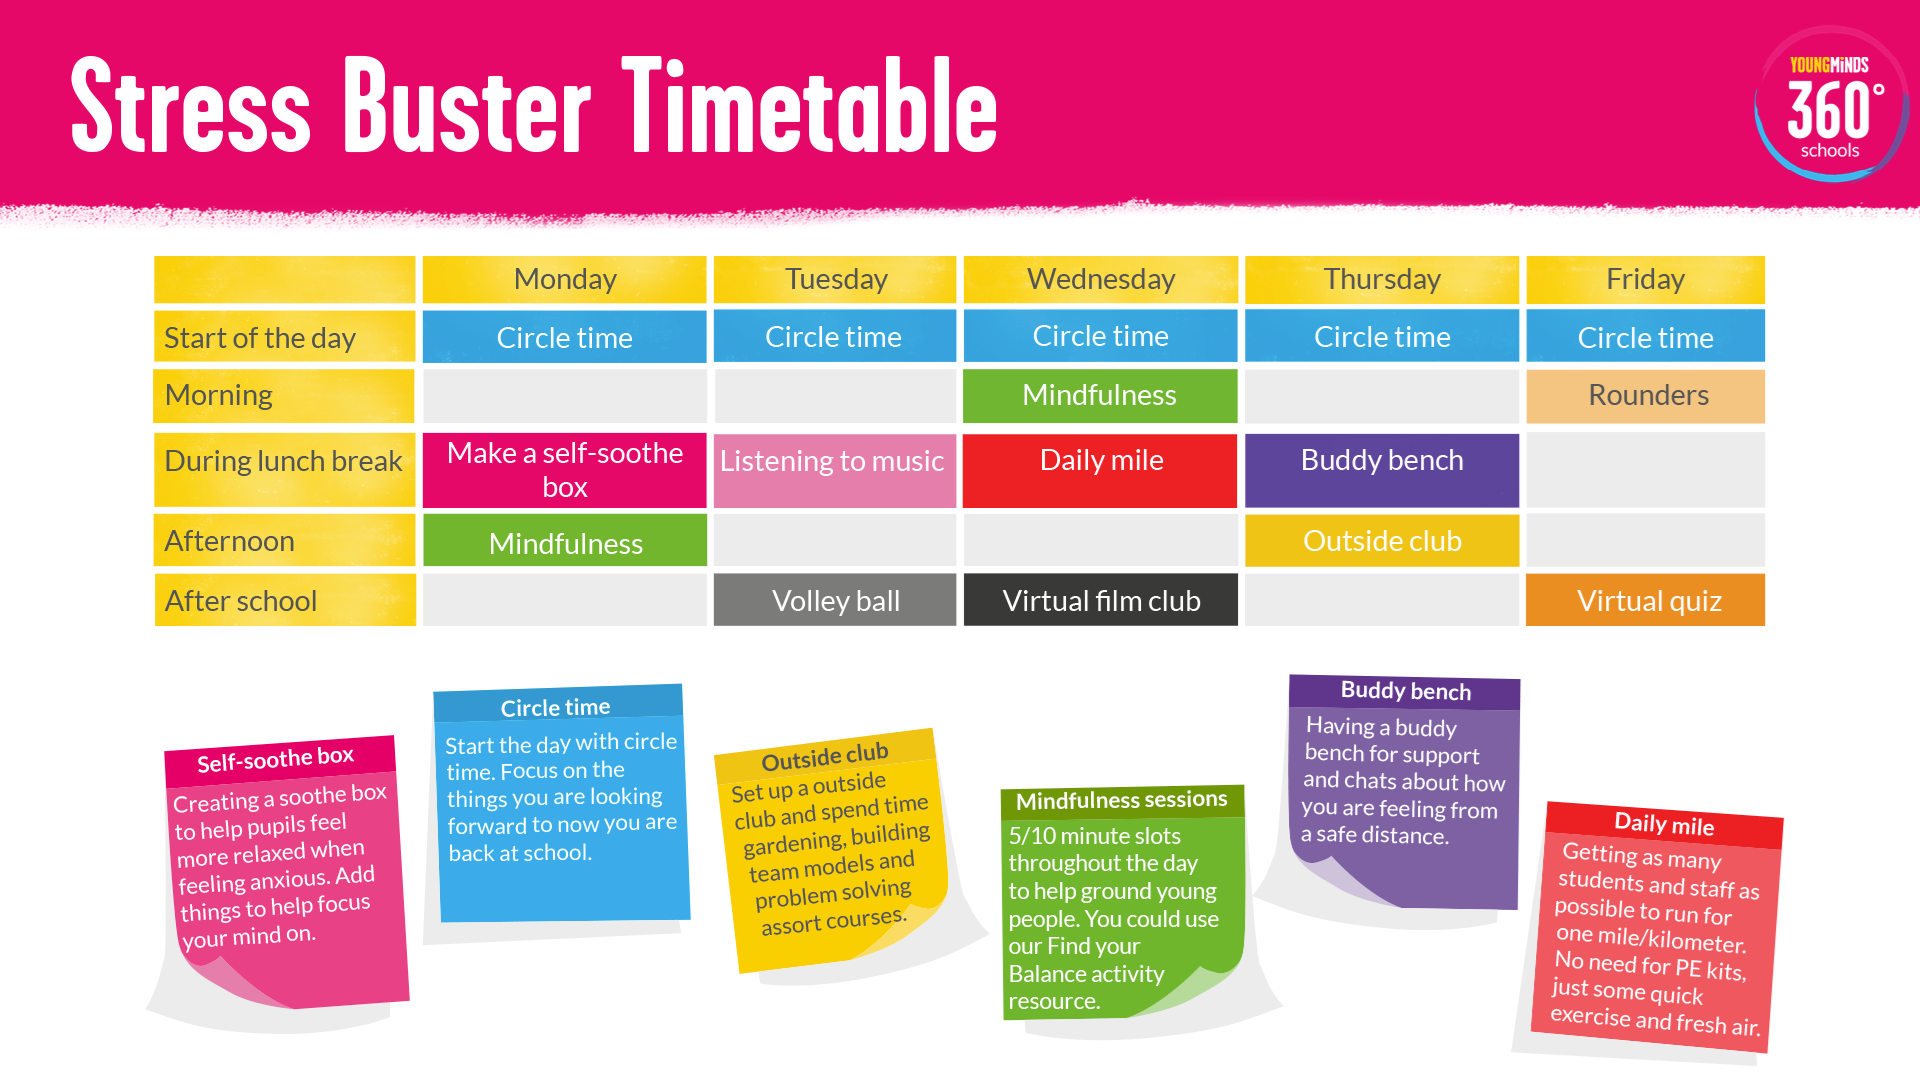 An image of our Stress Buster Timetable.